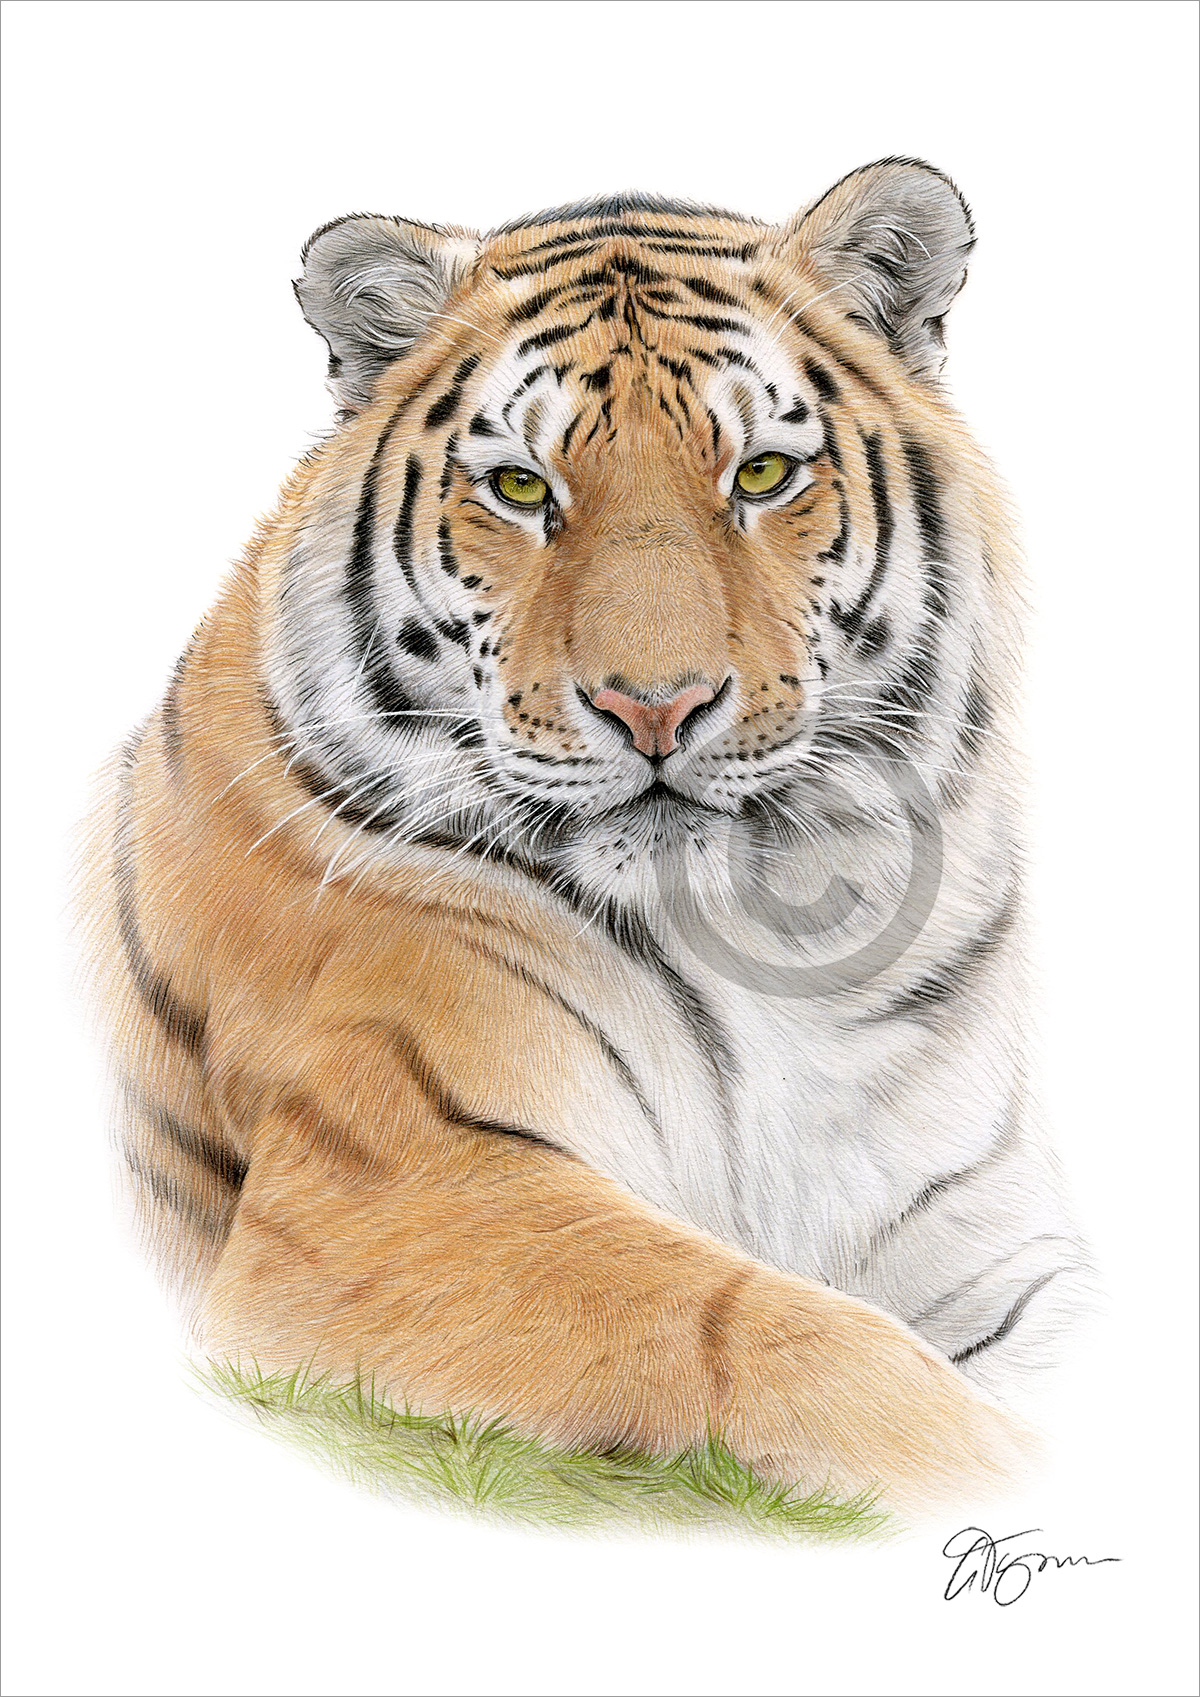 Colour pencil drawing of a Bengal Tiger in portrait by artist Gary Tymon